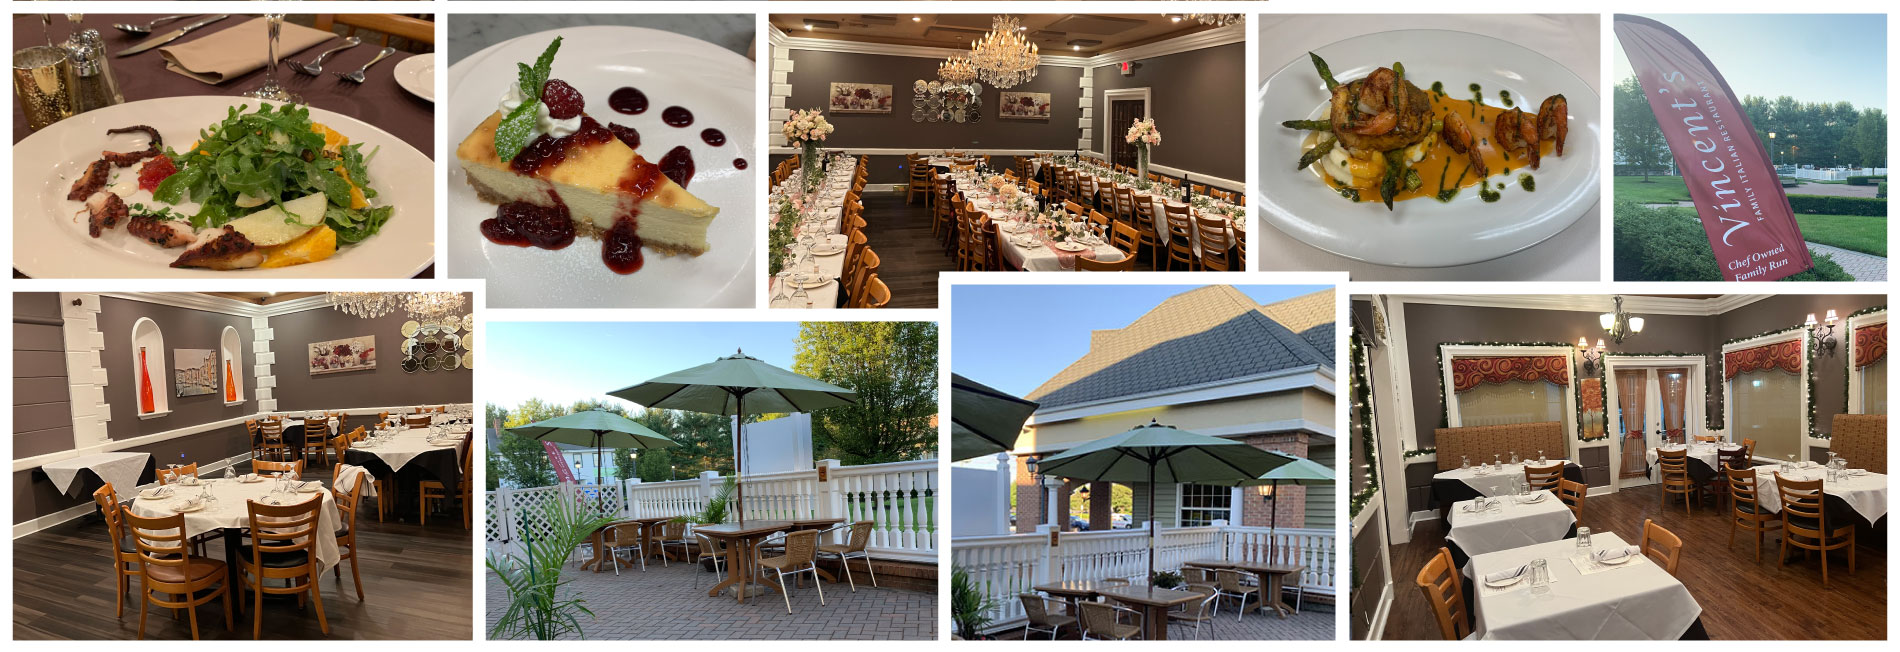 dining options at Vincent's Restaurant in Freehold, NJ